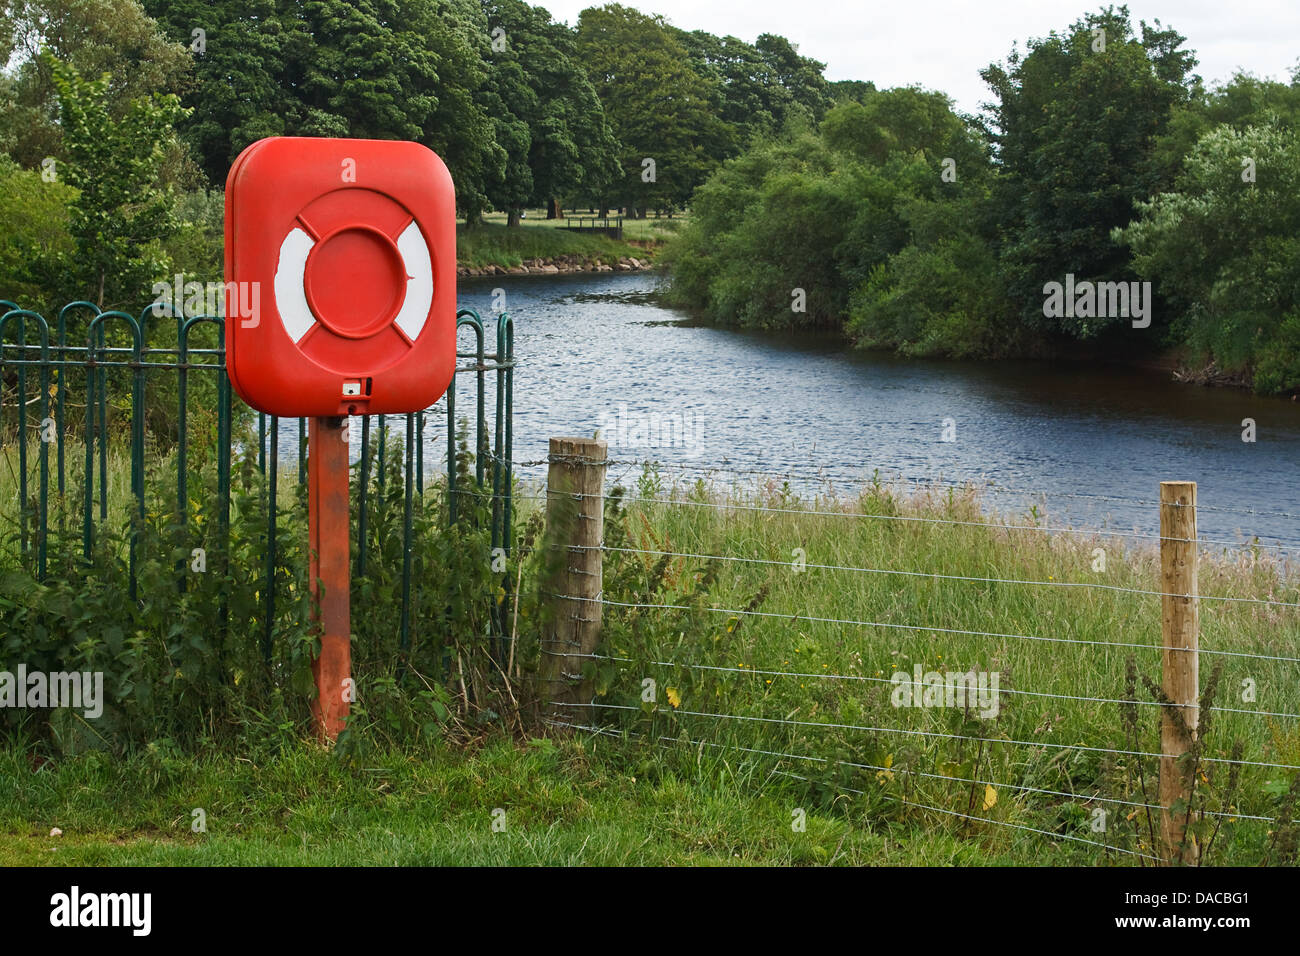 red life preserver in a riverside setting at local park Stock Photo